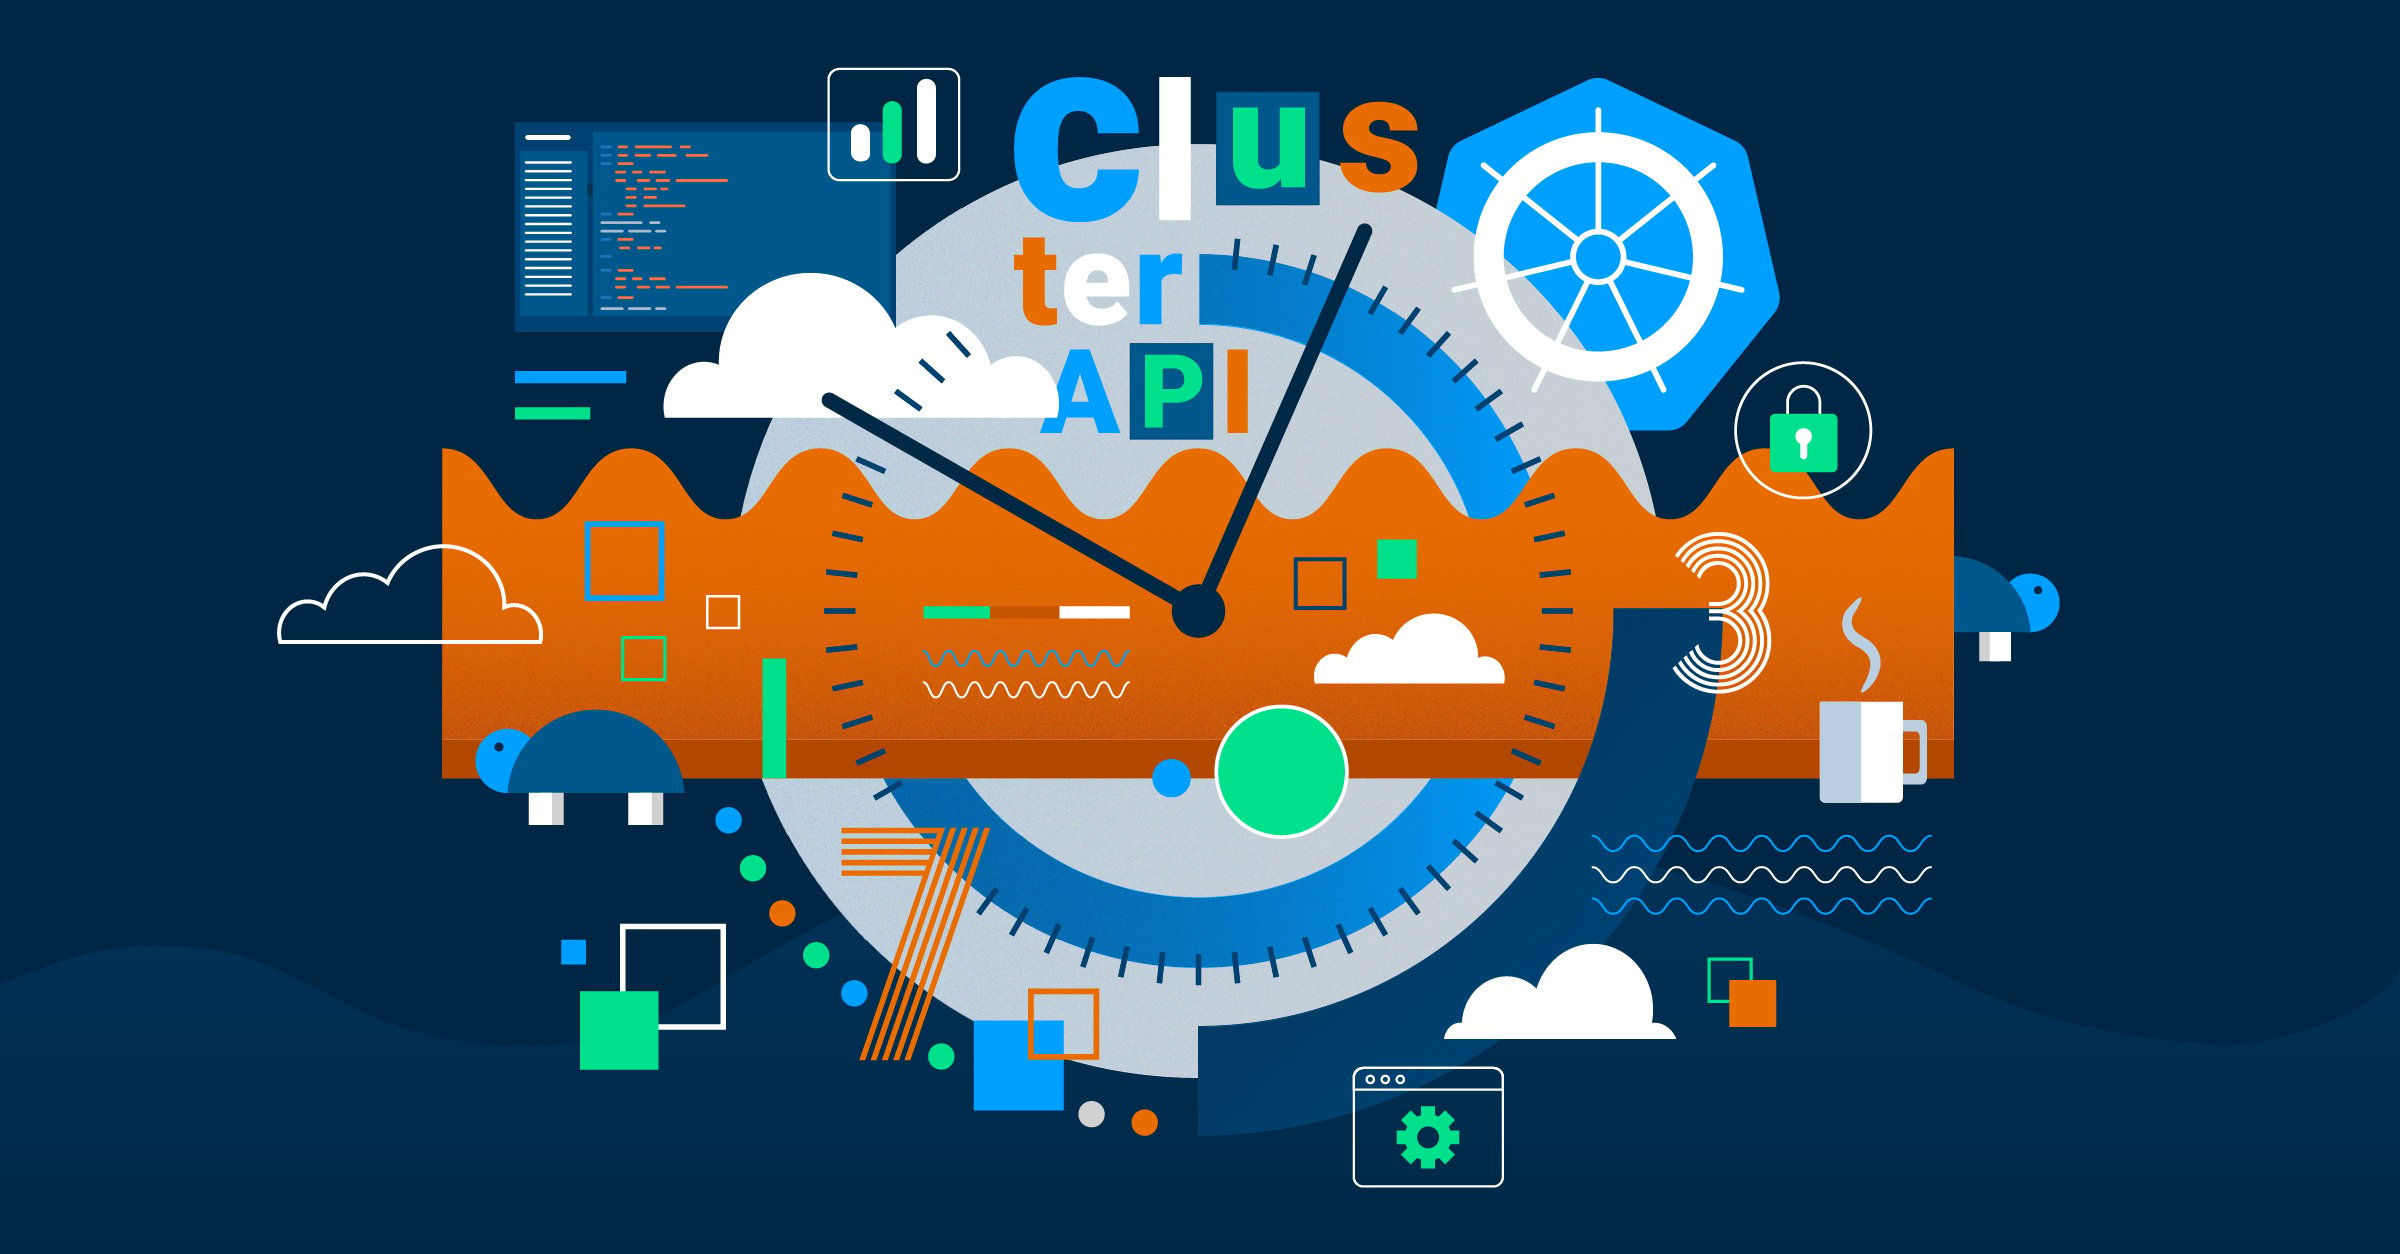 It's Cluster API time — are you ready? image thumbnail